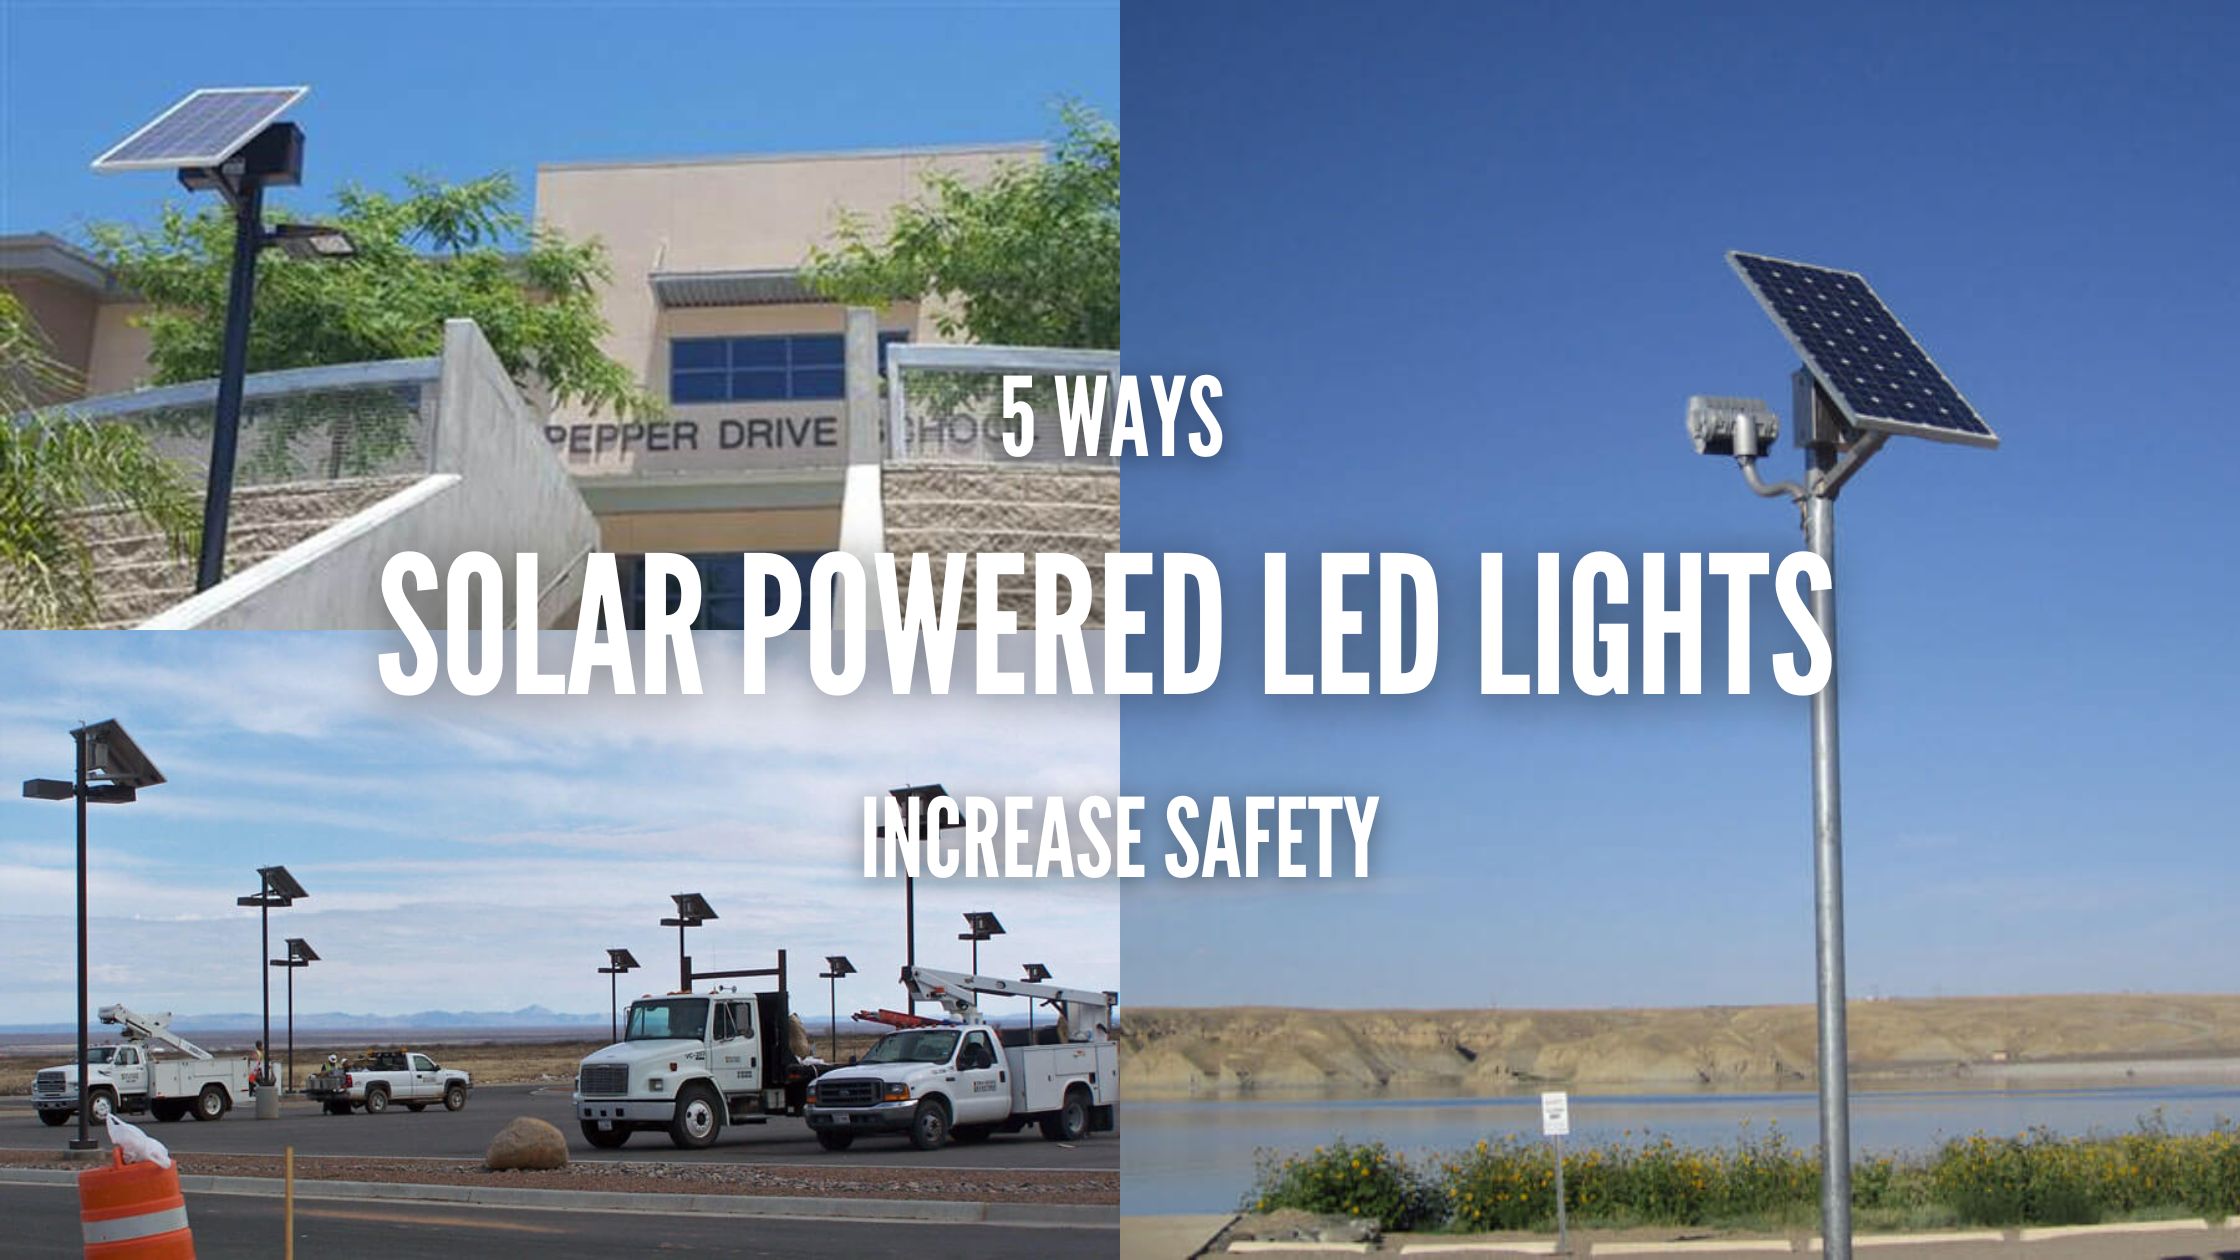 5 Ways Solar Powered Outdoor LED Lights Increase Safety